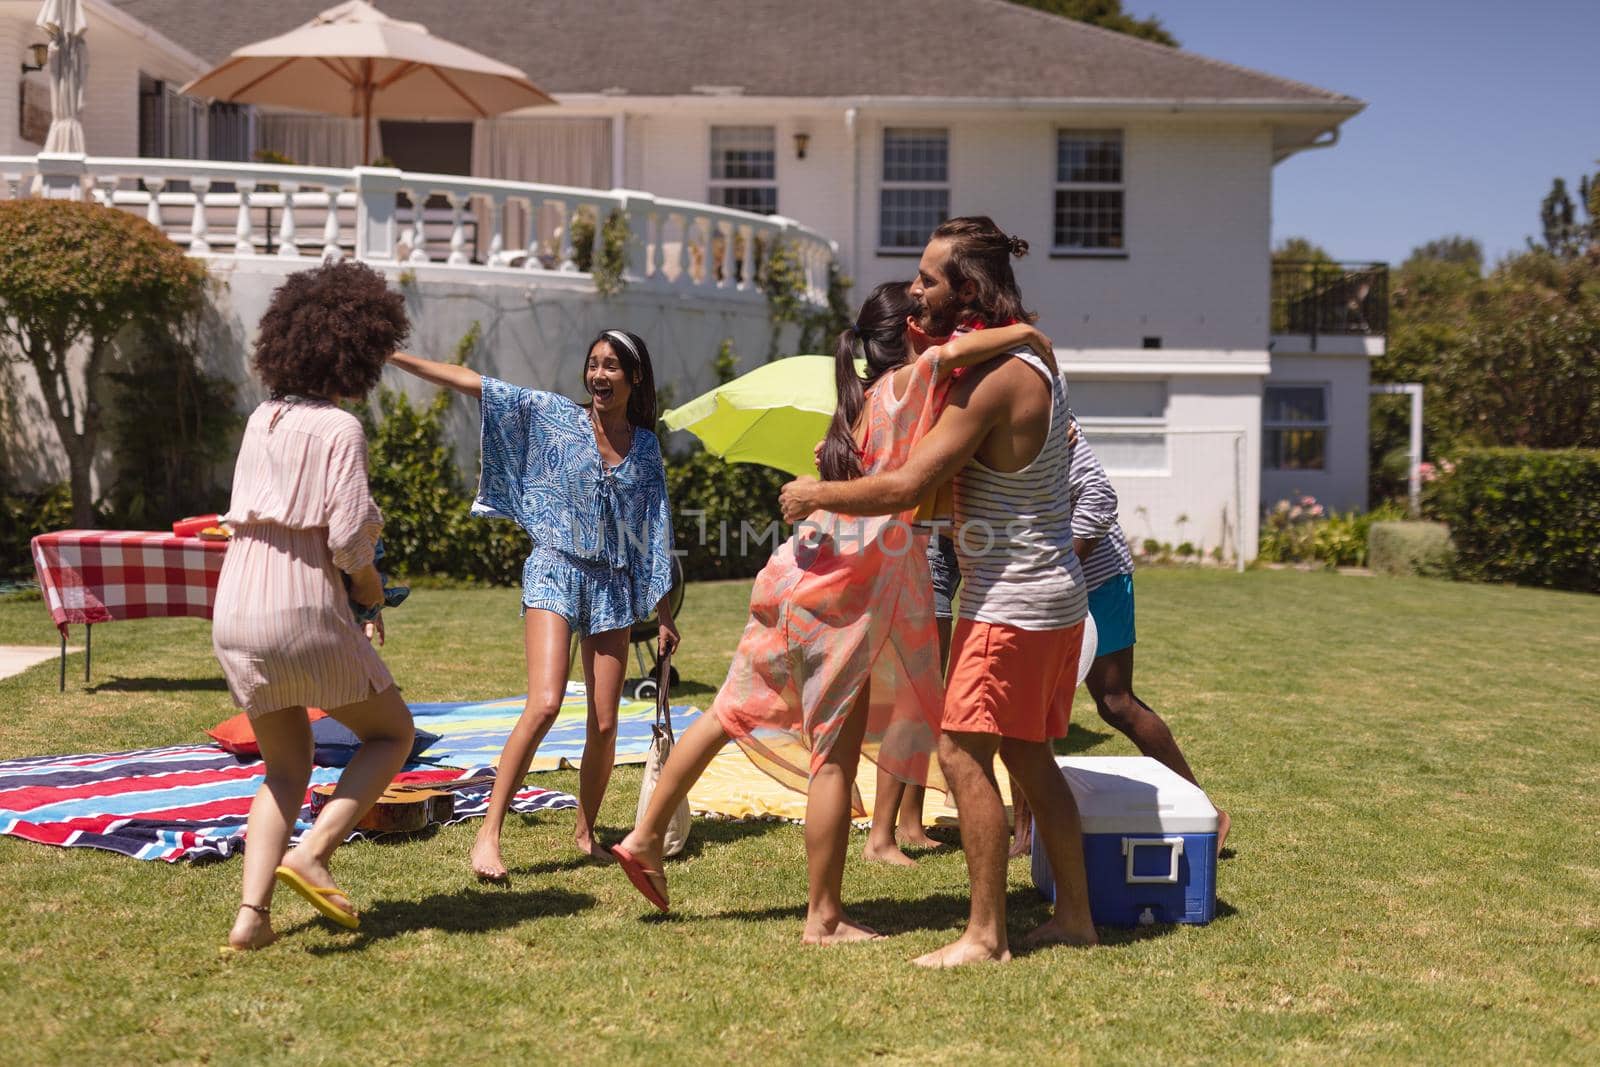 Diverse group of friends greeting each other at a pool party. Hanging out and relaxing outdoors in summer.